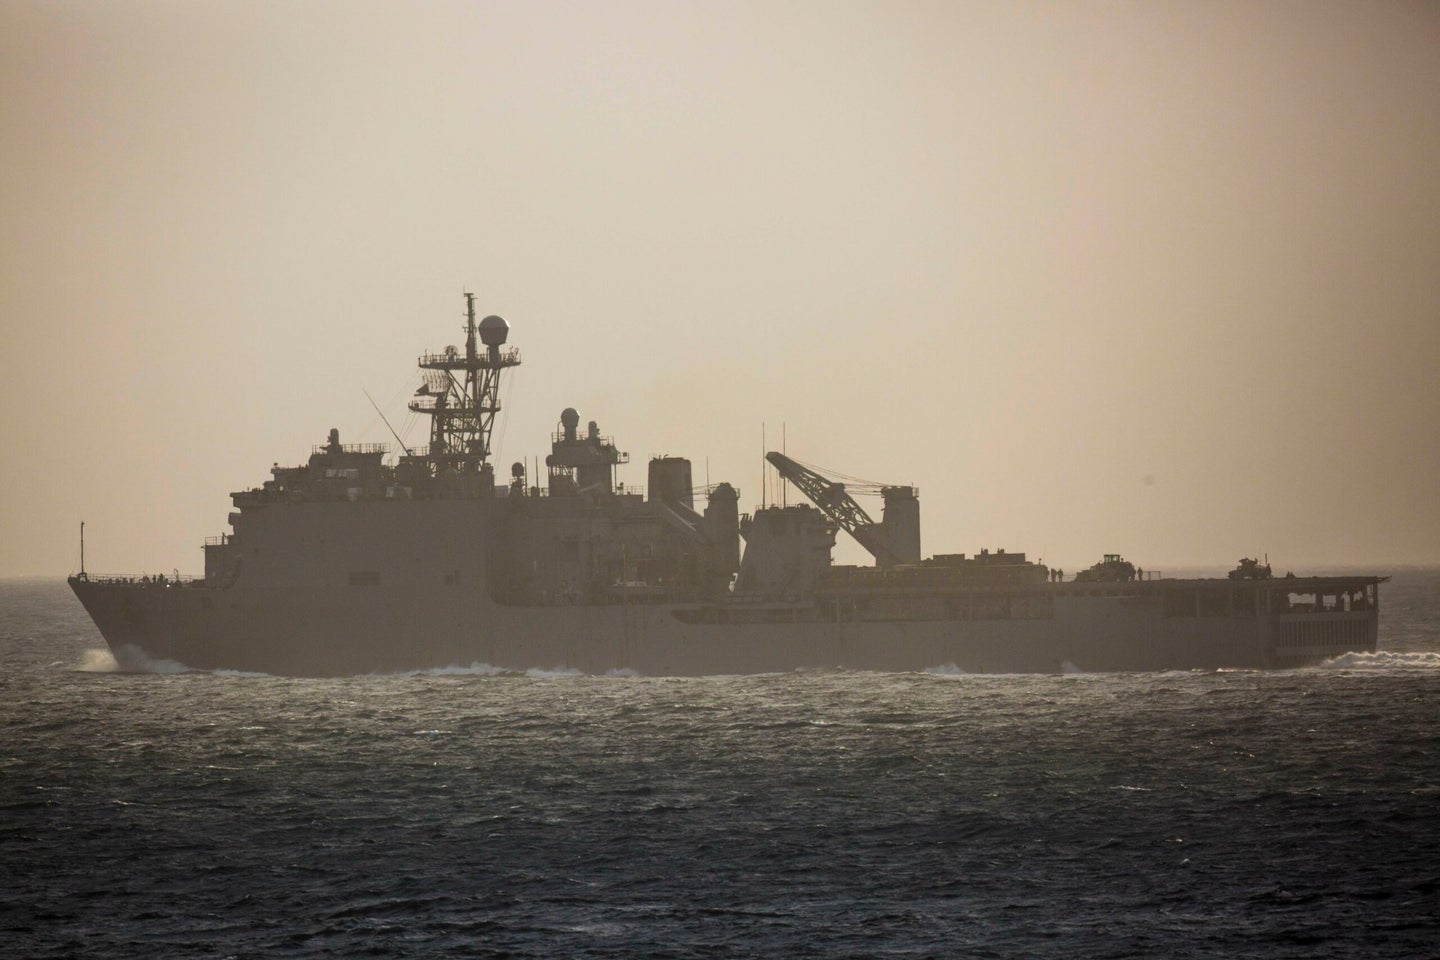 The Whidbey Island-class amphibious dock landing ship USS Rushmore (LSD 47) splits away from the Wasp-class amphibious ship USS Essex (LHD 2) while conducting a strait transit during Amphibious Ready Group (ARG), Marine Expeditionary Unit (MEU) Exercise (ARGMEUEX), April 30, 2018. ARGMEUEX provides essential and realistic ship-to-shore training, designed to enhance the integration of the Navy-Marine Corps team. Additionally, ARGMEUEX provides an opportunity to integrate unique individual and unit skills and develop the Essex ARG and 13th MEU’s collective proficiency in challenging and unfamiliar environments. (U.S. Marine Corps Photo by Cpl. Francisco J. Diaz Jr.)